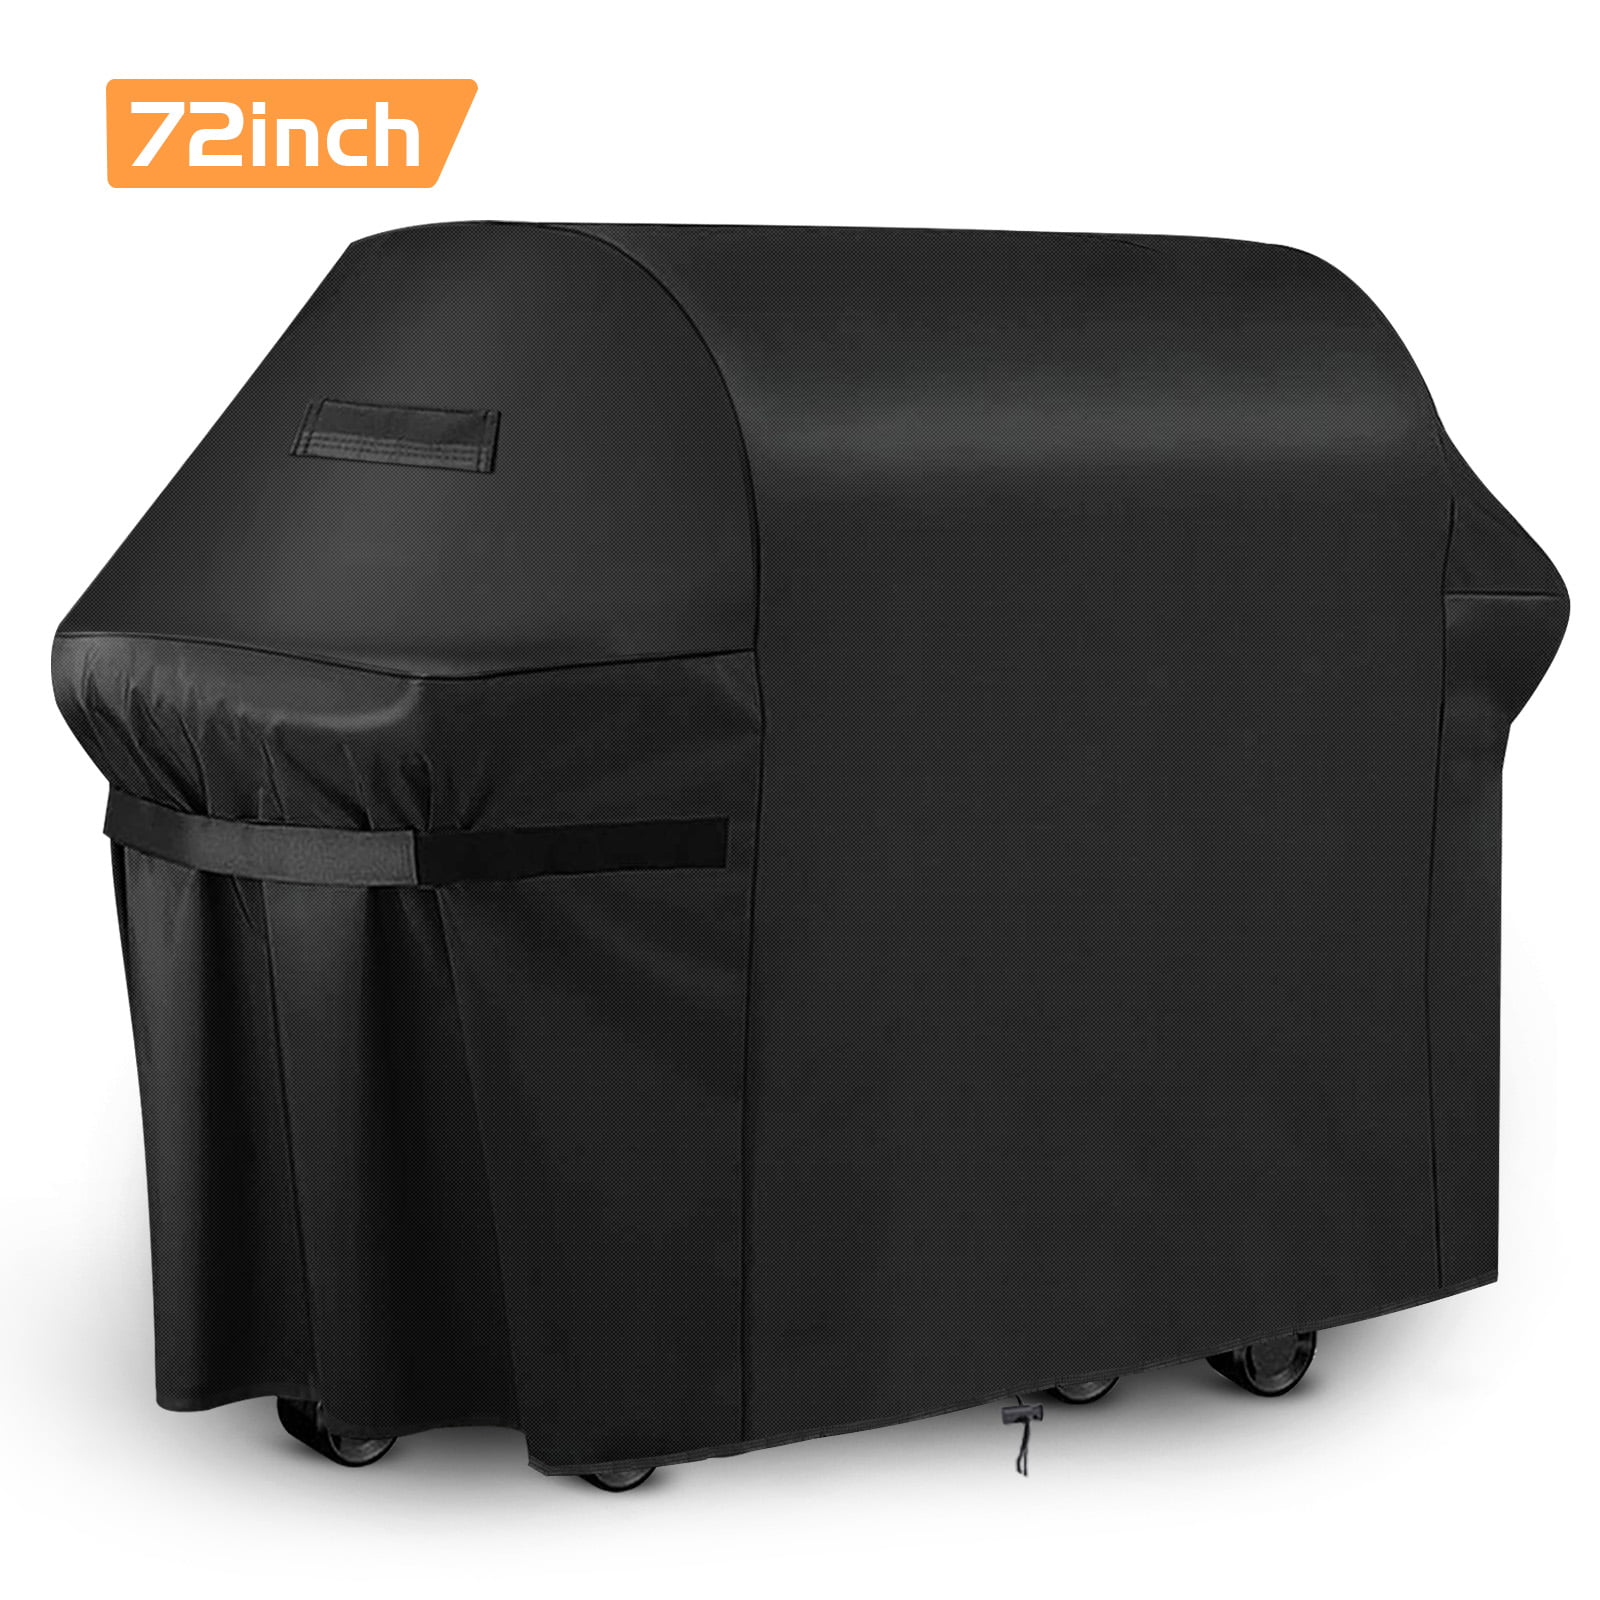 Essort BBQ Cover Barbecue Cover Waterproof Large BBQ Cover 420d Oxford Fabric Heavy Duty BBQ Grill Cover 2 Burner Gas BBQ Cover Small Anti UV Fit for Weber 77x67x110cm 30x26x43 